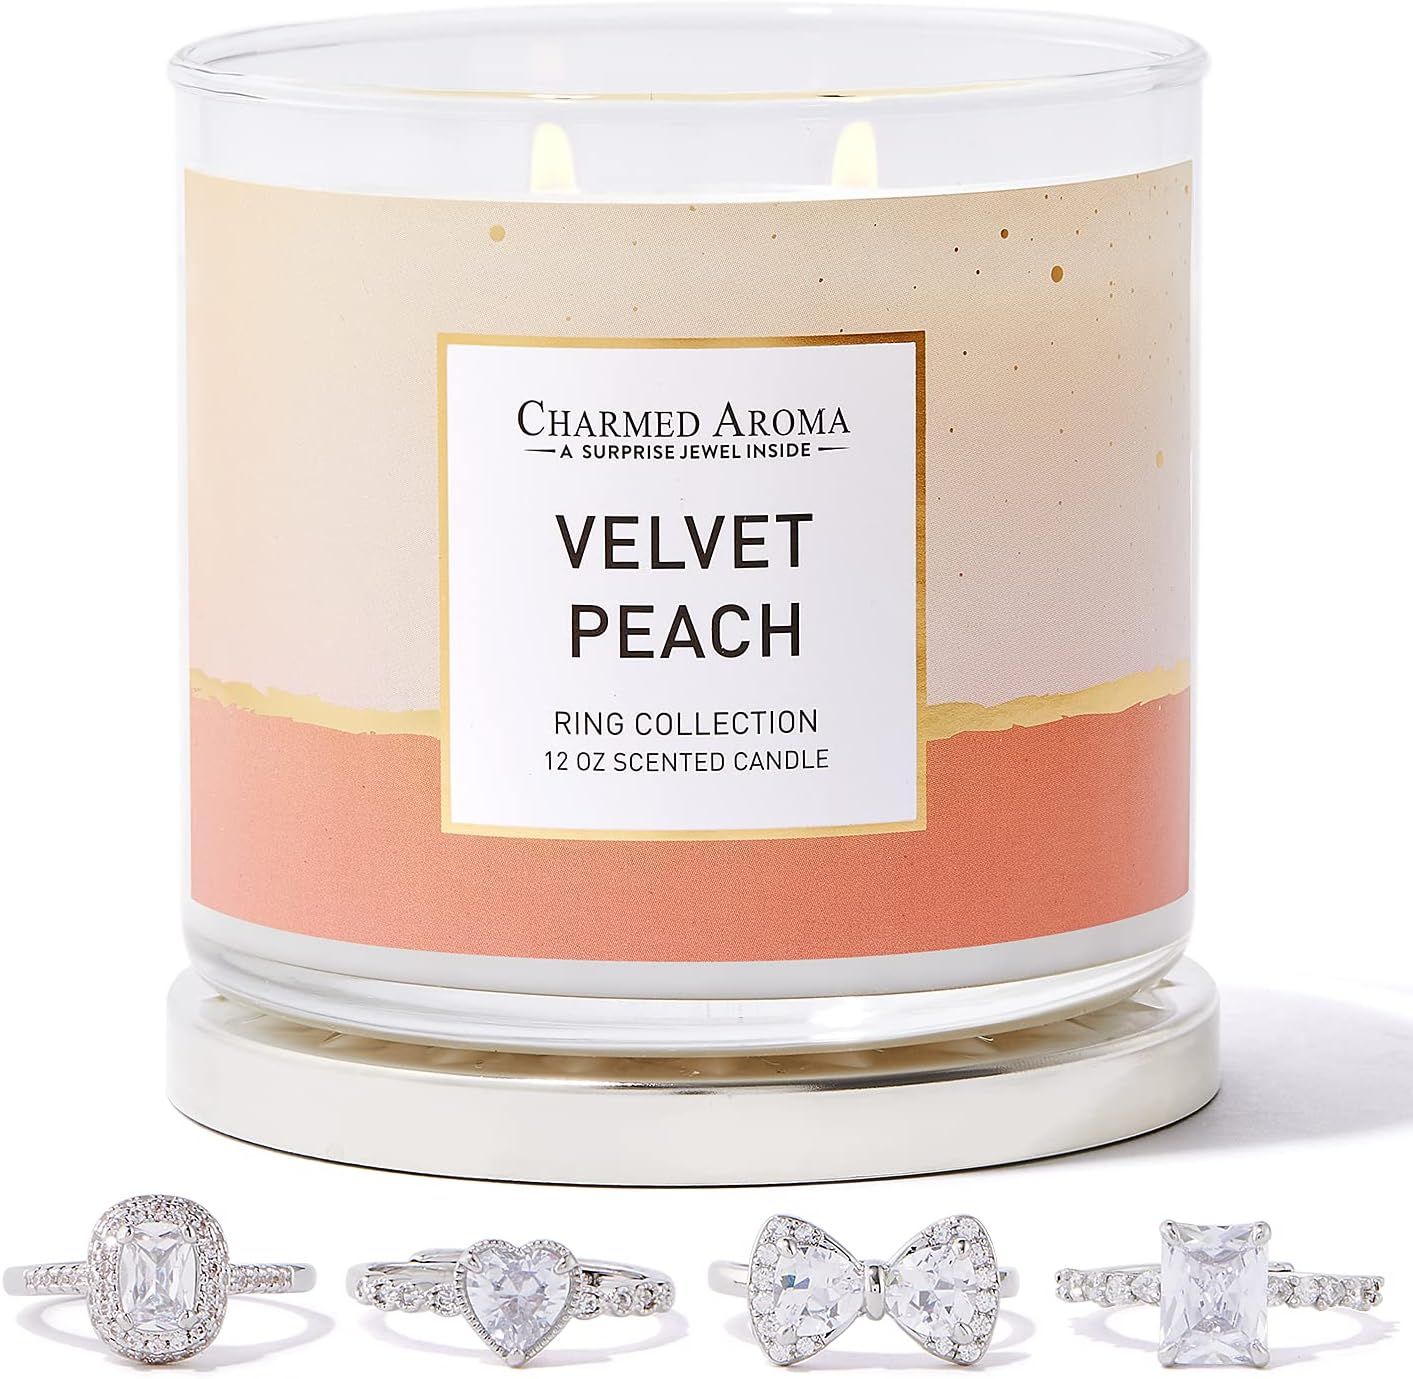 Charmed Aroma 2-Wick, Velvet Peach Jewelry Candle with Surprise Ring Inside, Amazon Exclusive | Amazon (US)